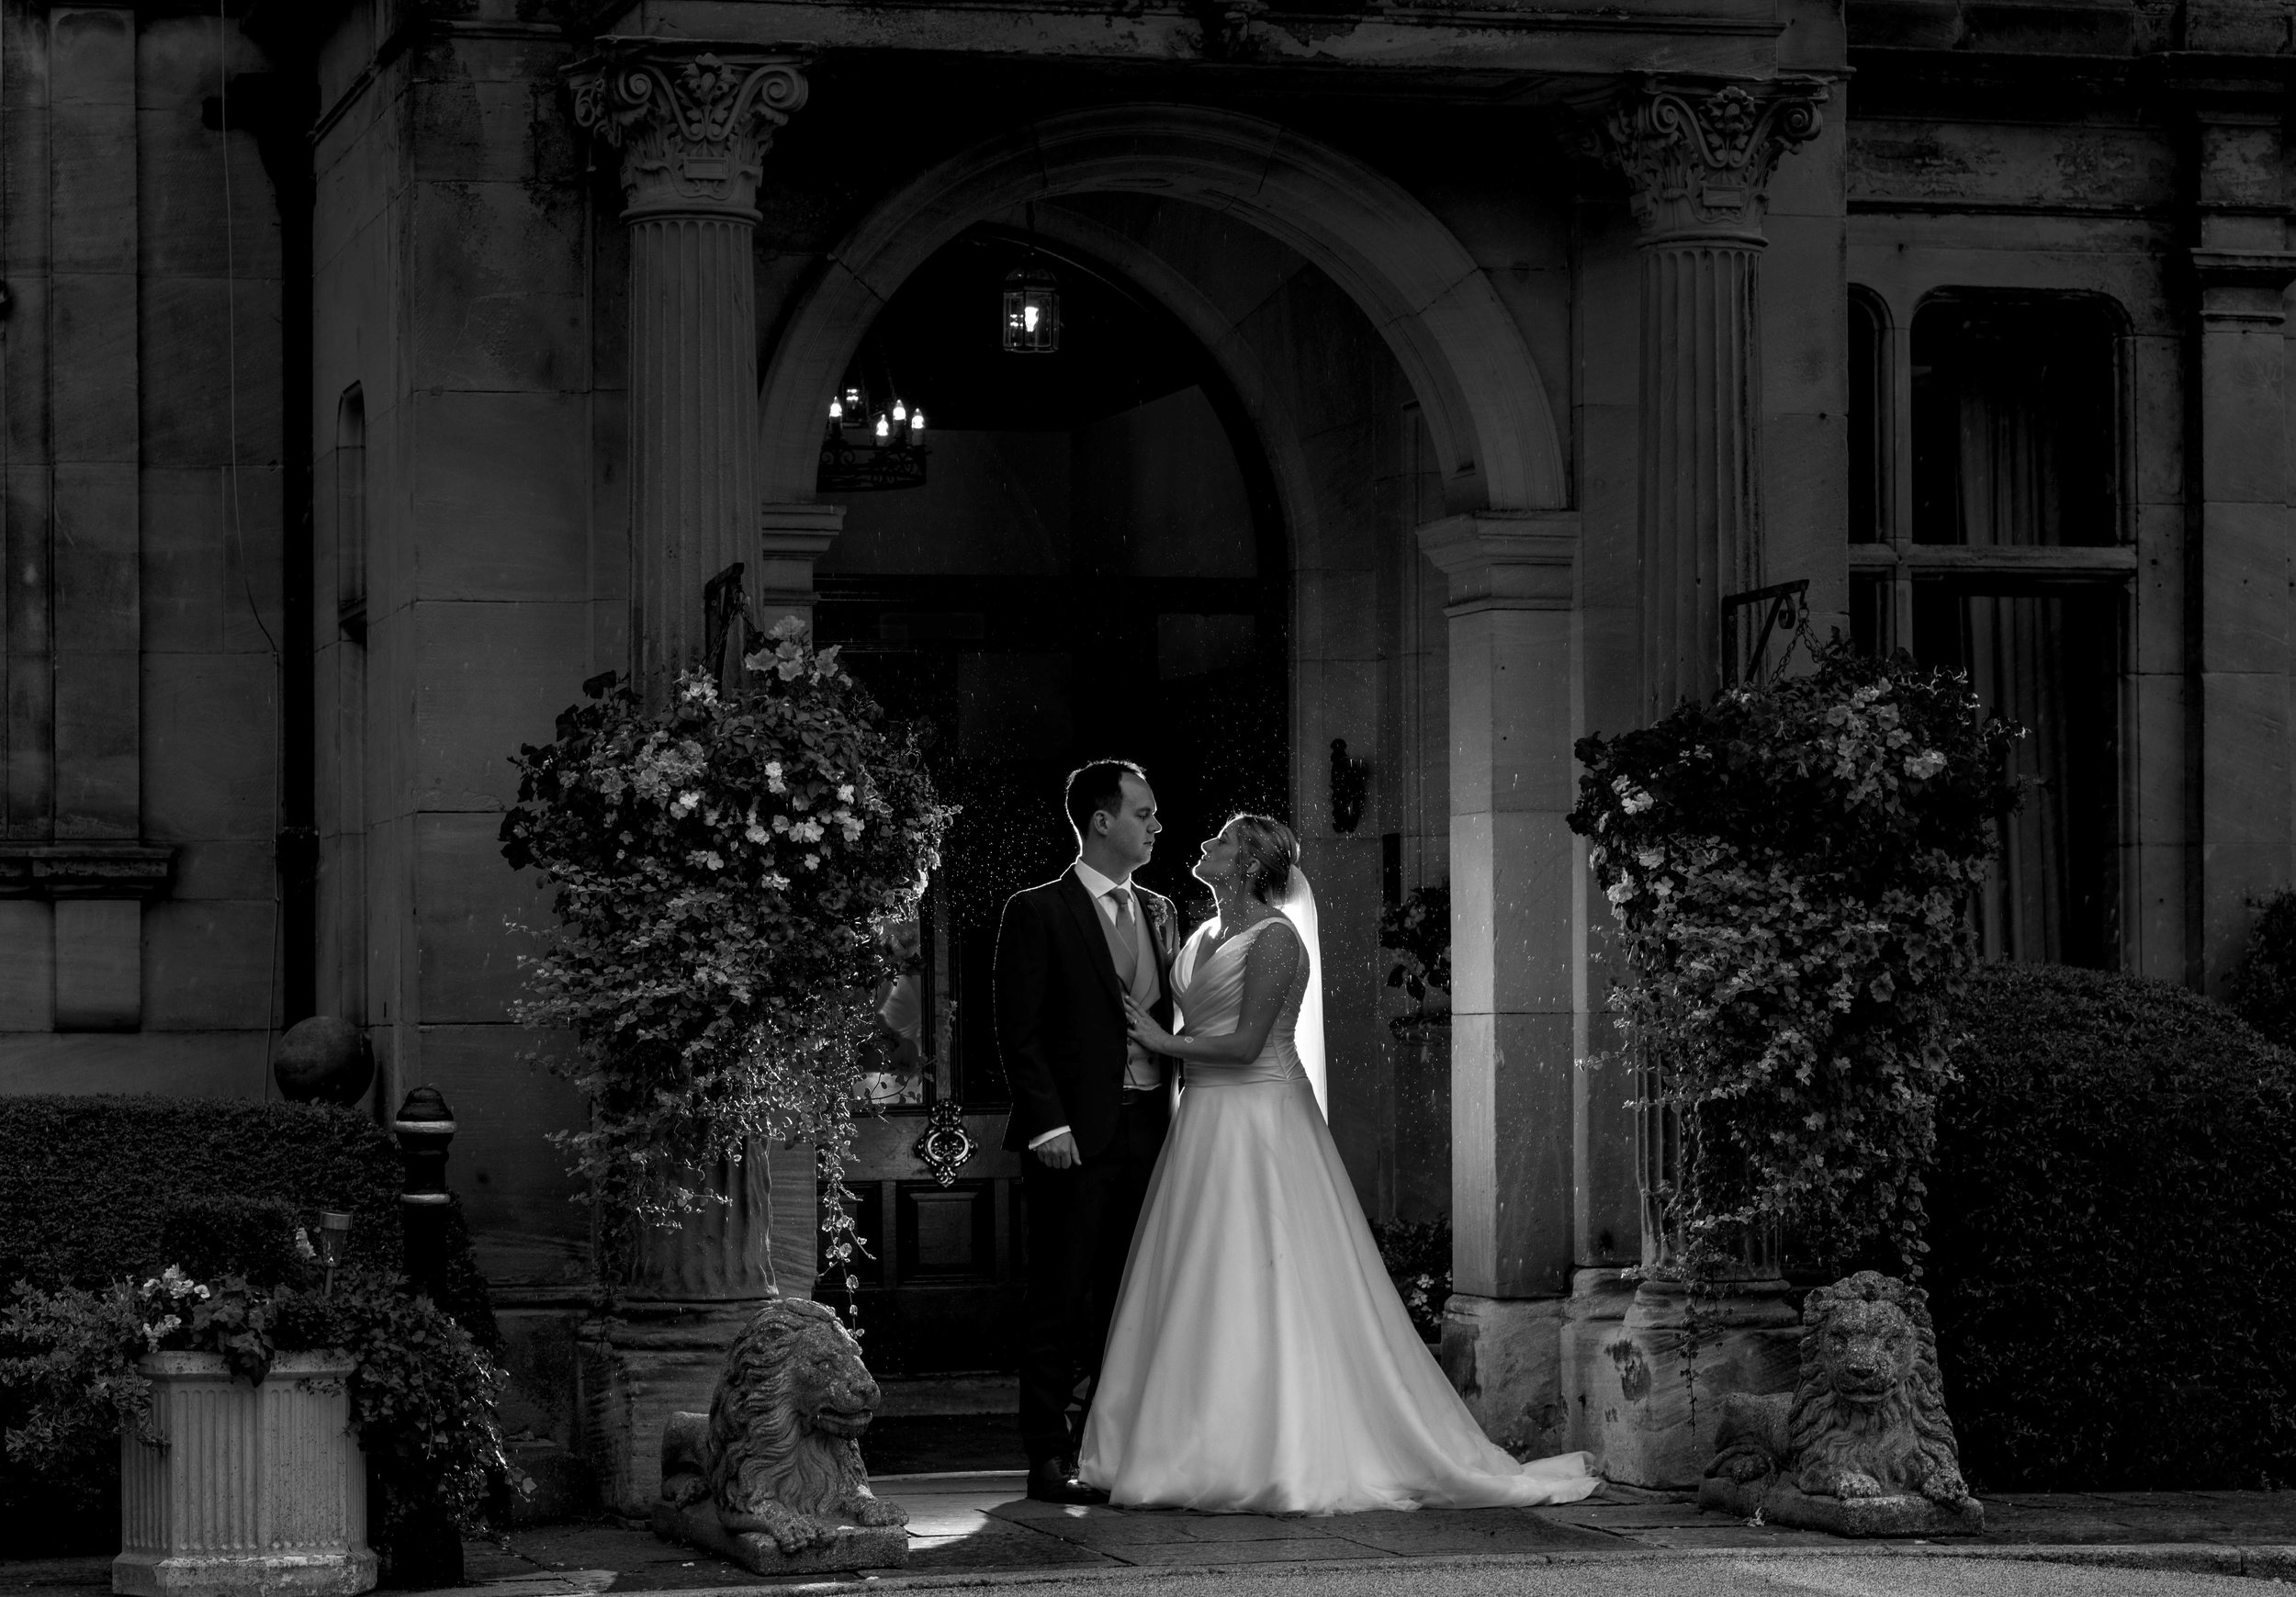 The bride and groom in the entrance to rookery hall